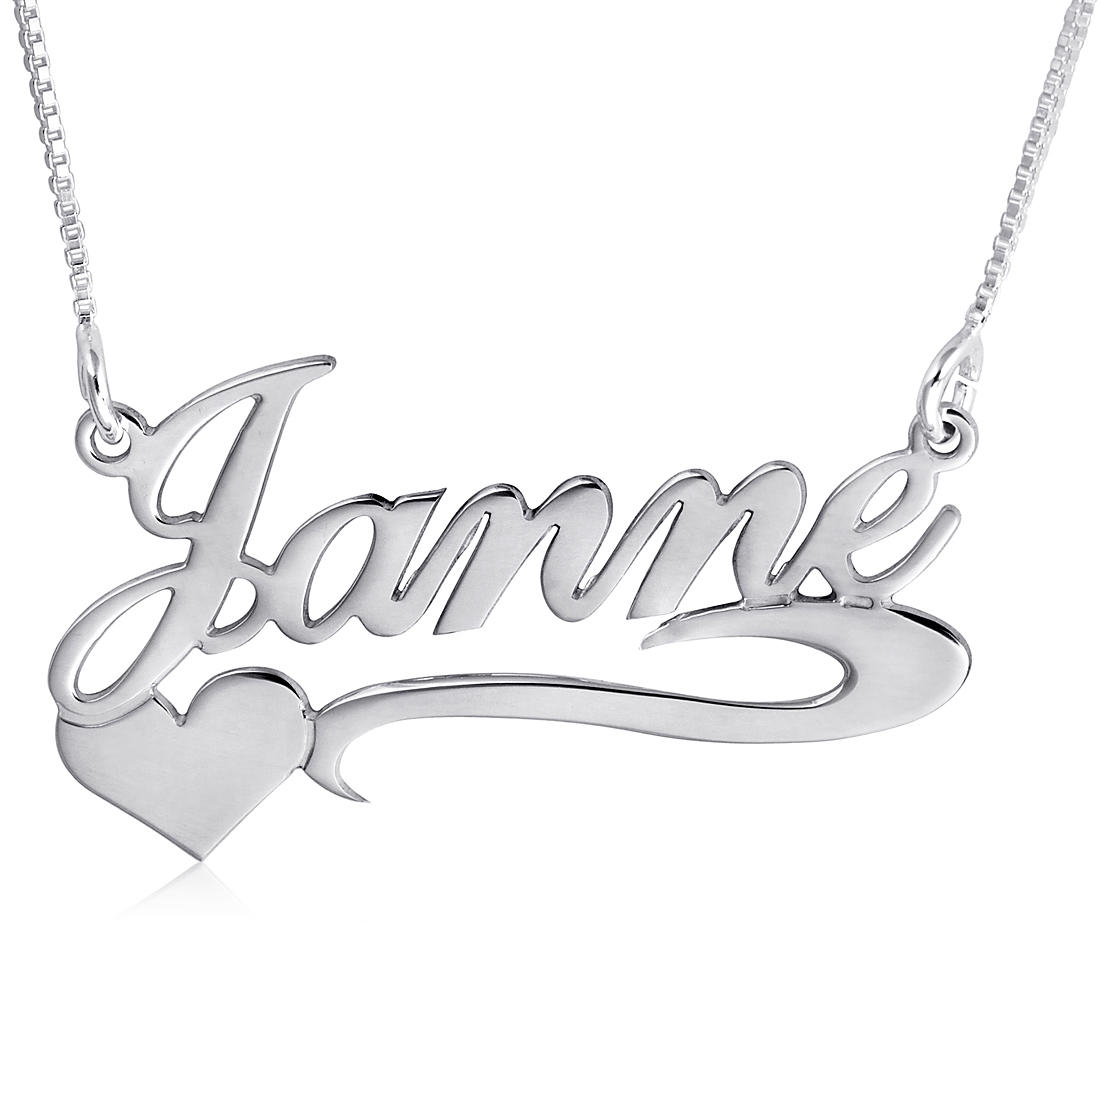 Heart Swoosh Name Necklace, Sterling Silver - 1